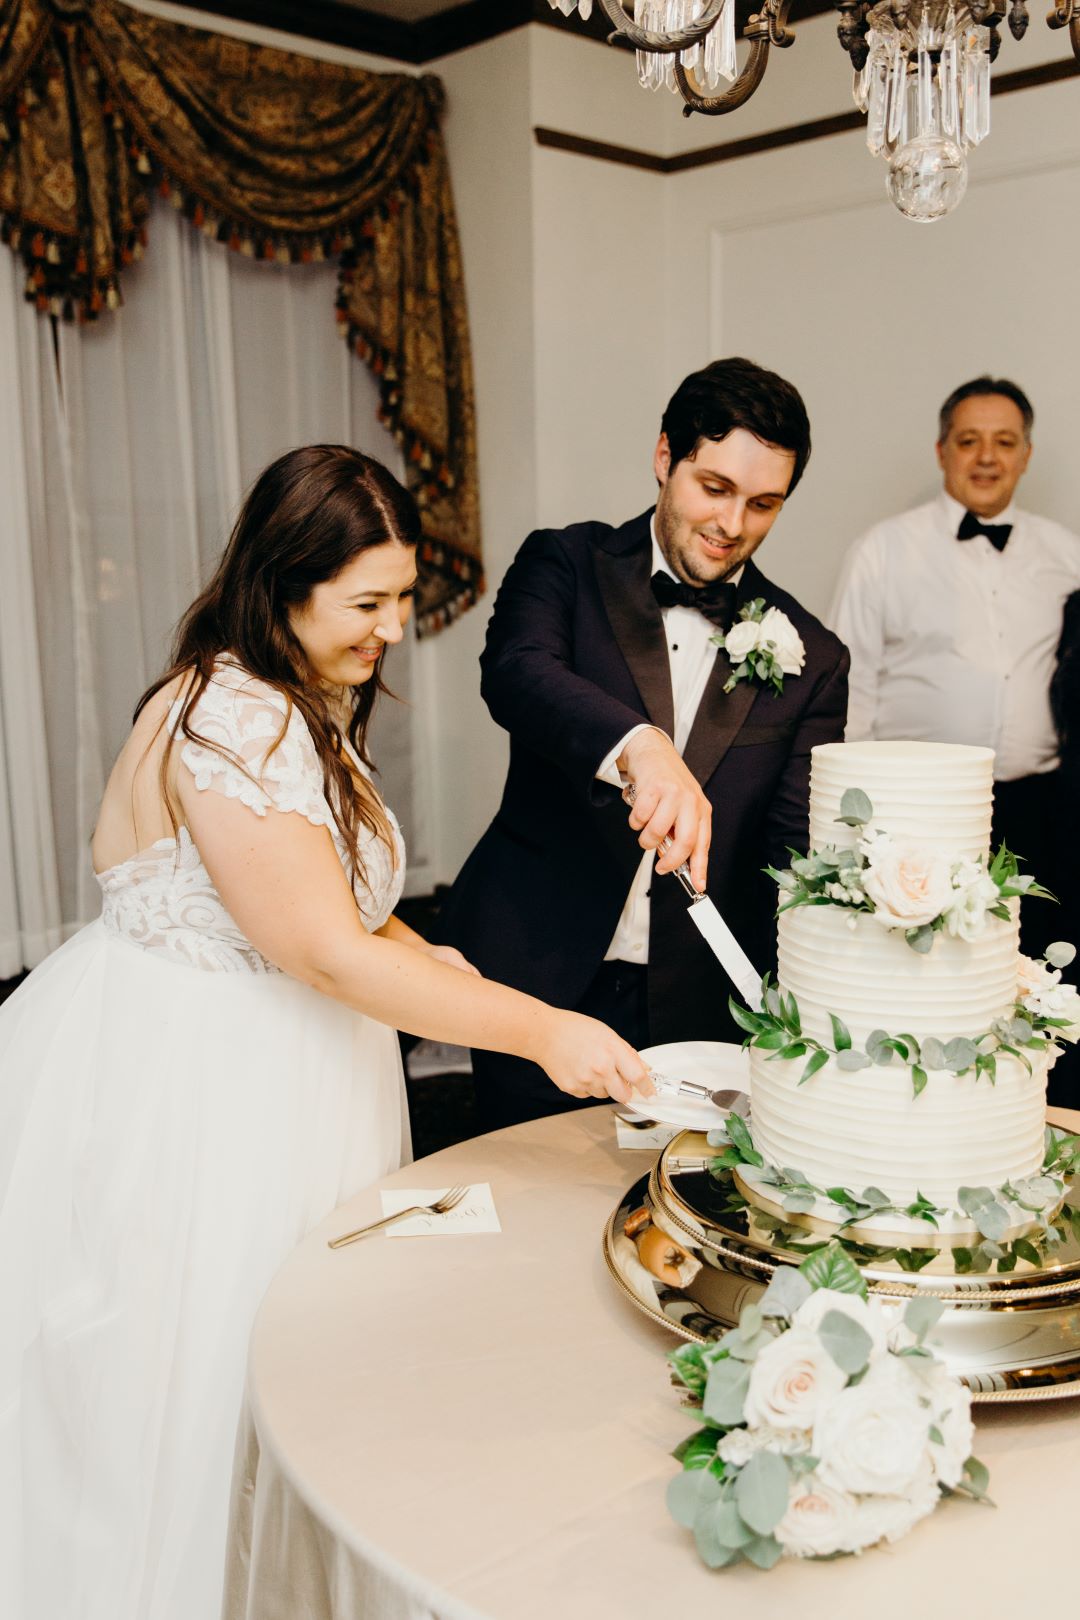 Bride and groom cutting the cake at their earthy summer garden wedding in September, neutrals & greenery